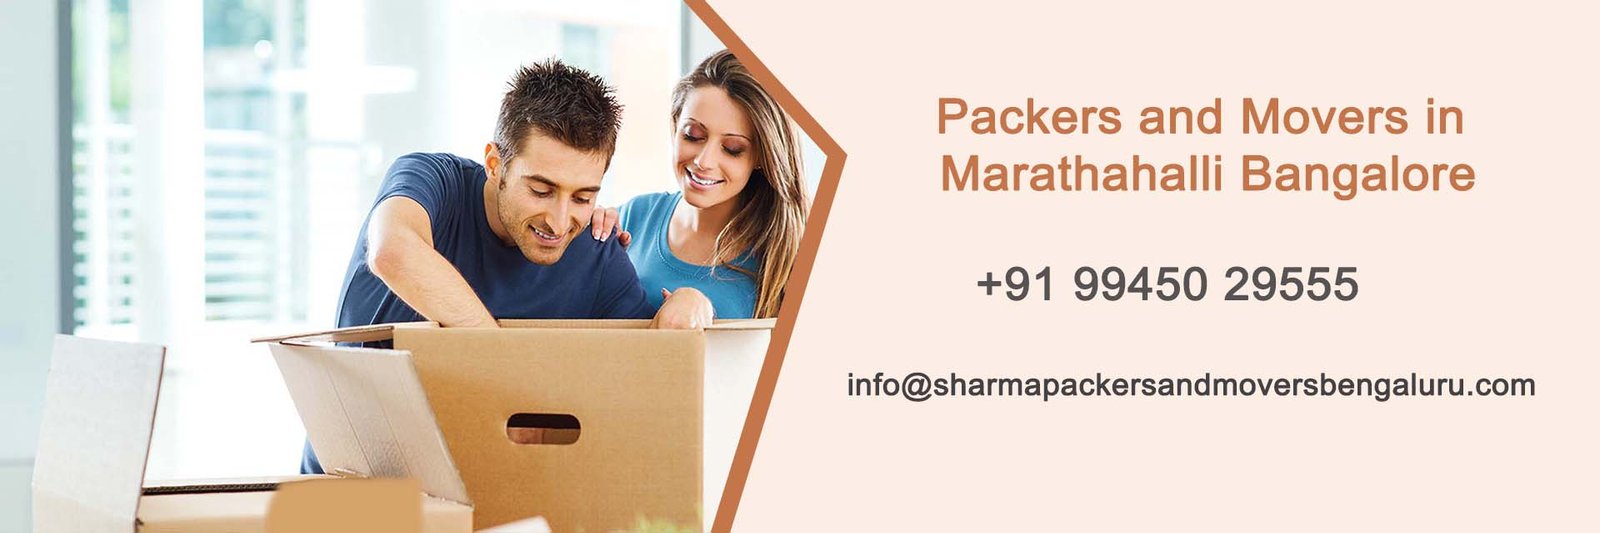 Packers and Movers in Marathahalli Bangalore